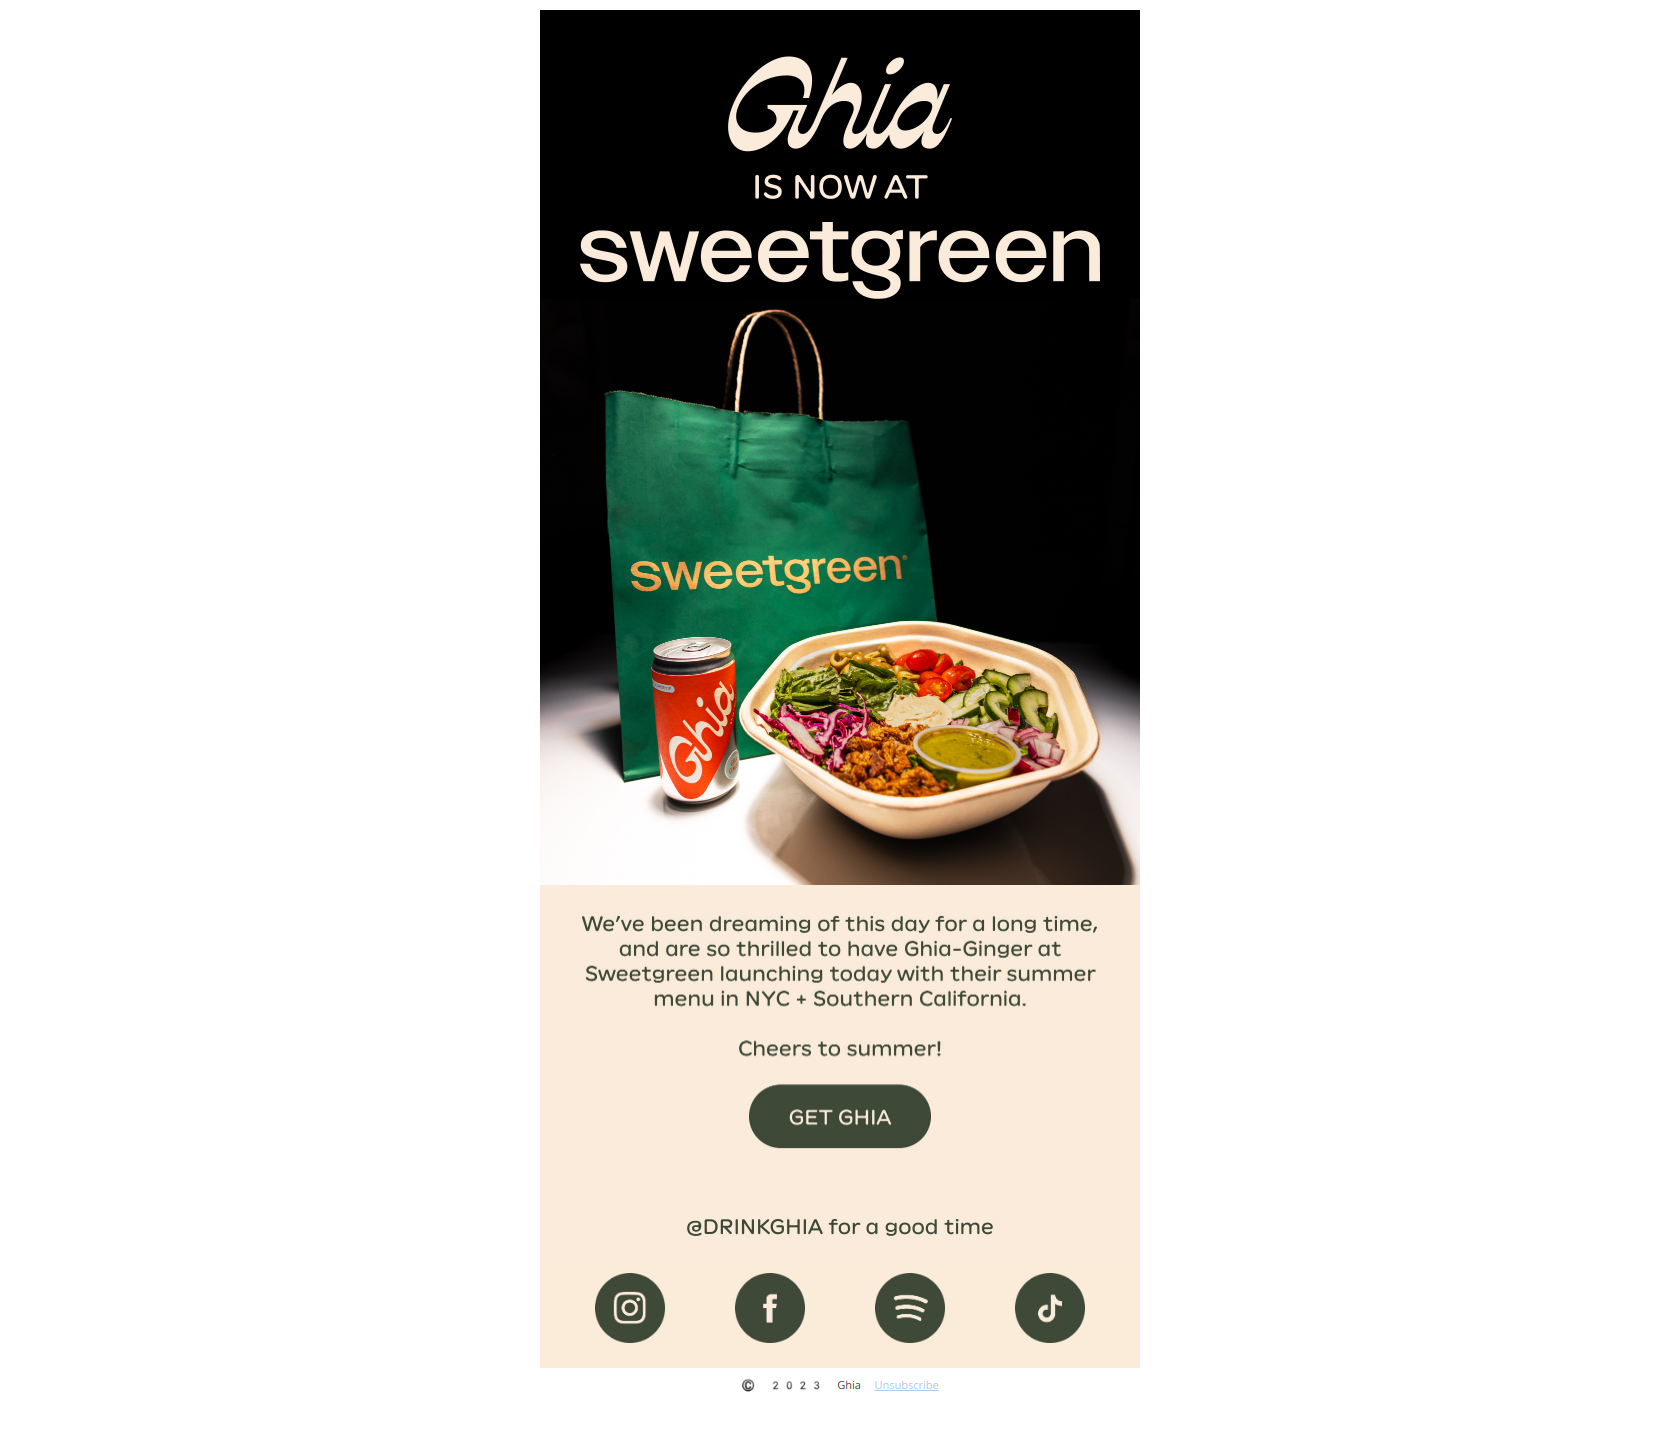 We’re at Sweetgreen!